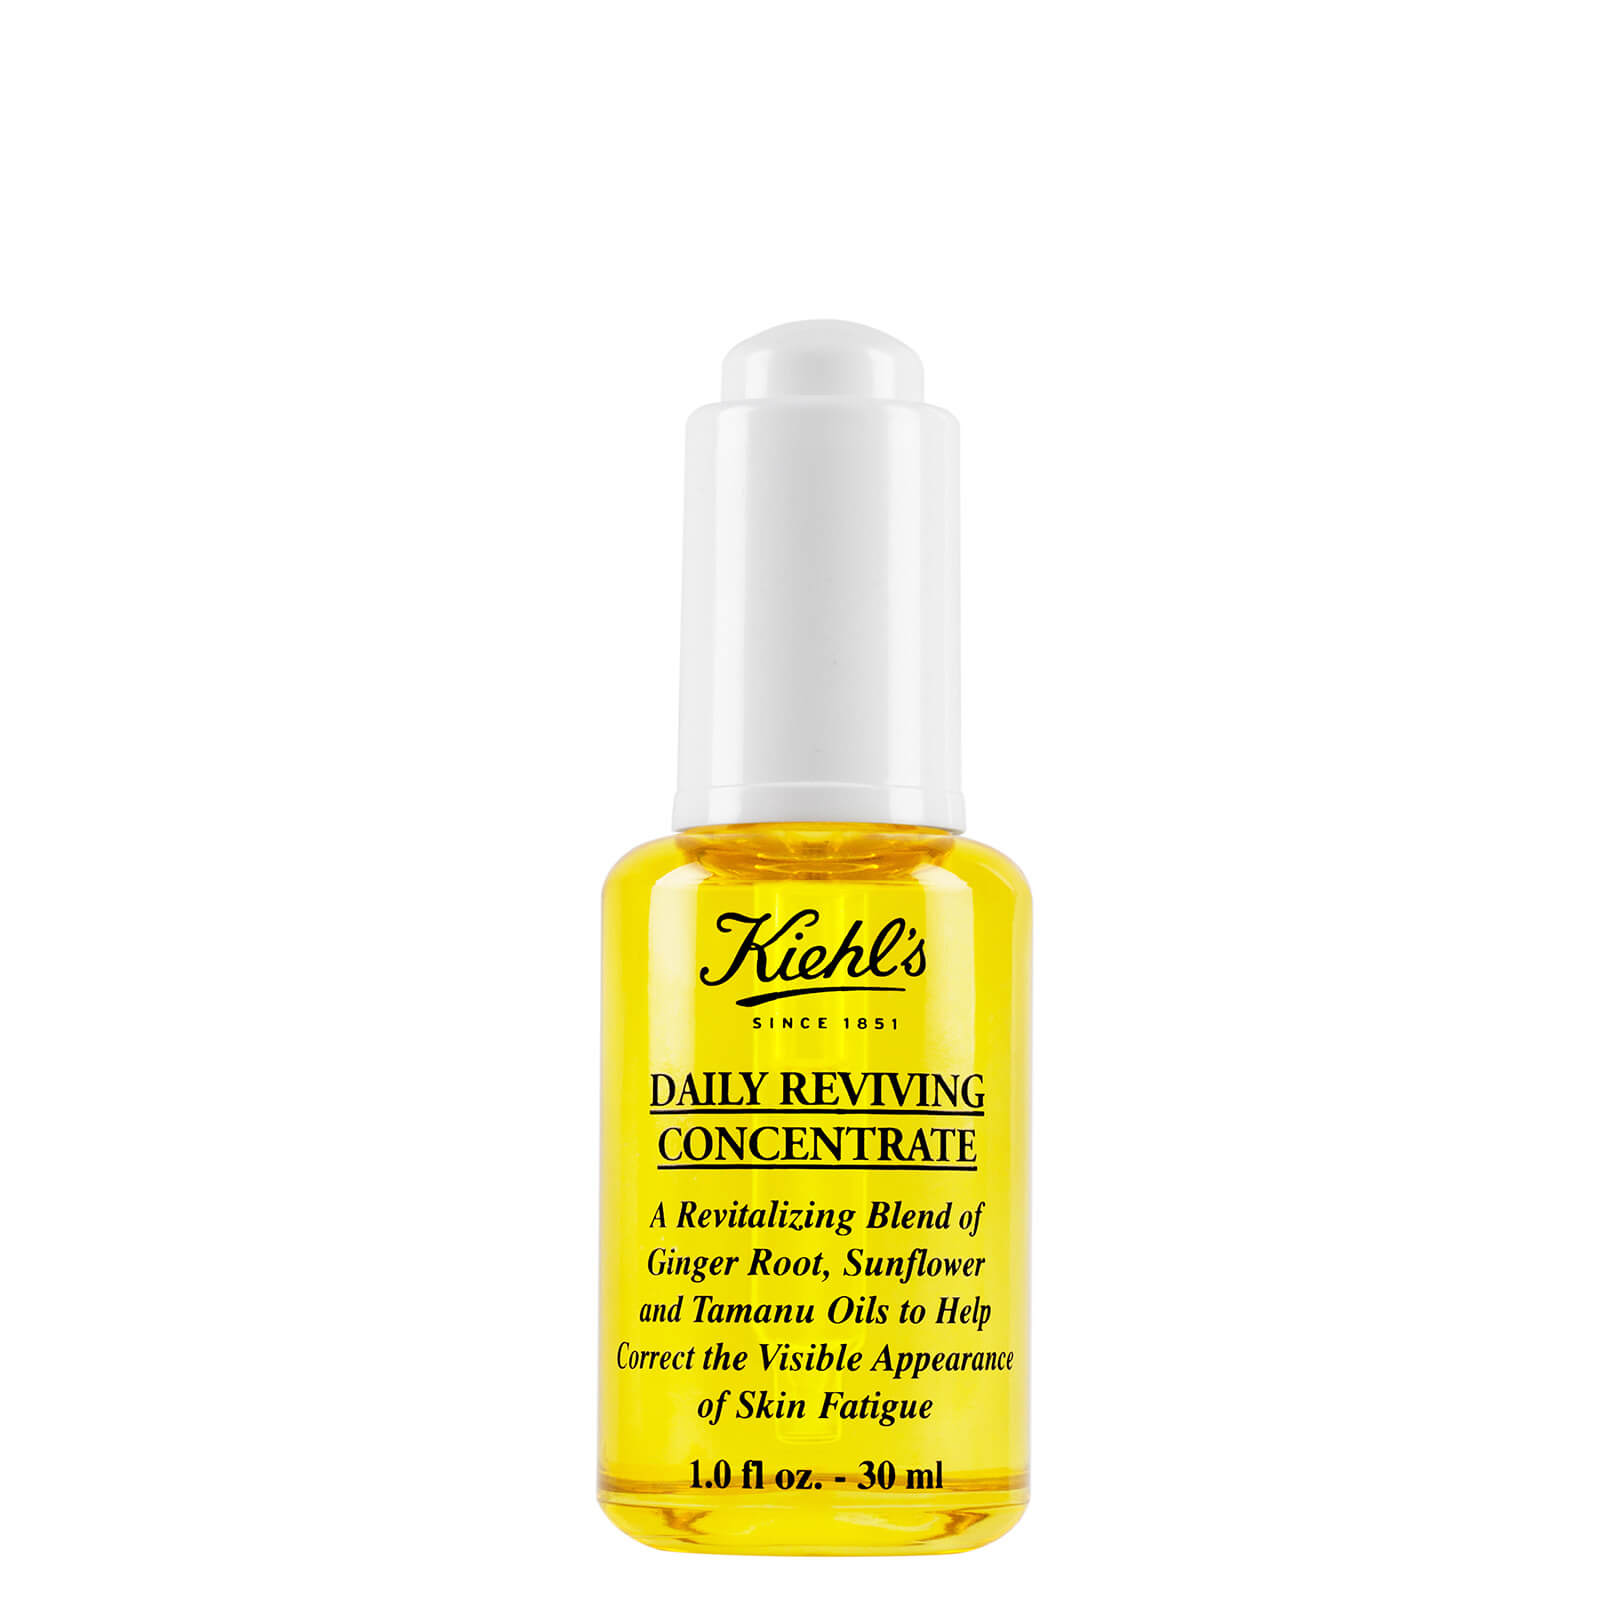 Kiehl's Daily Reviving Concentrate (Various Sizes) - 30ml